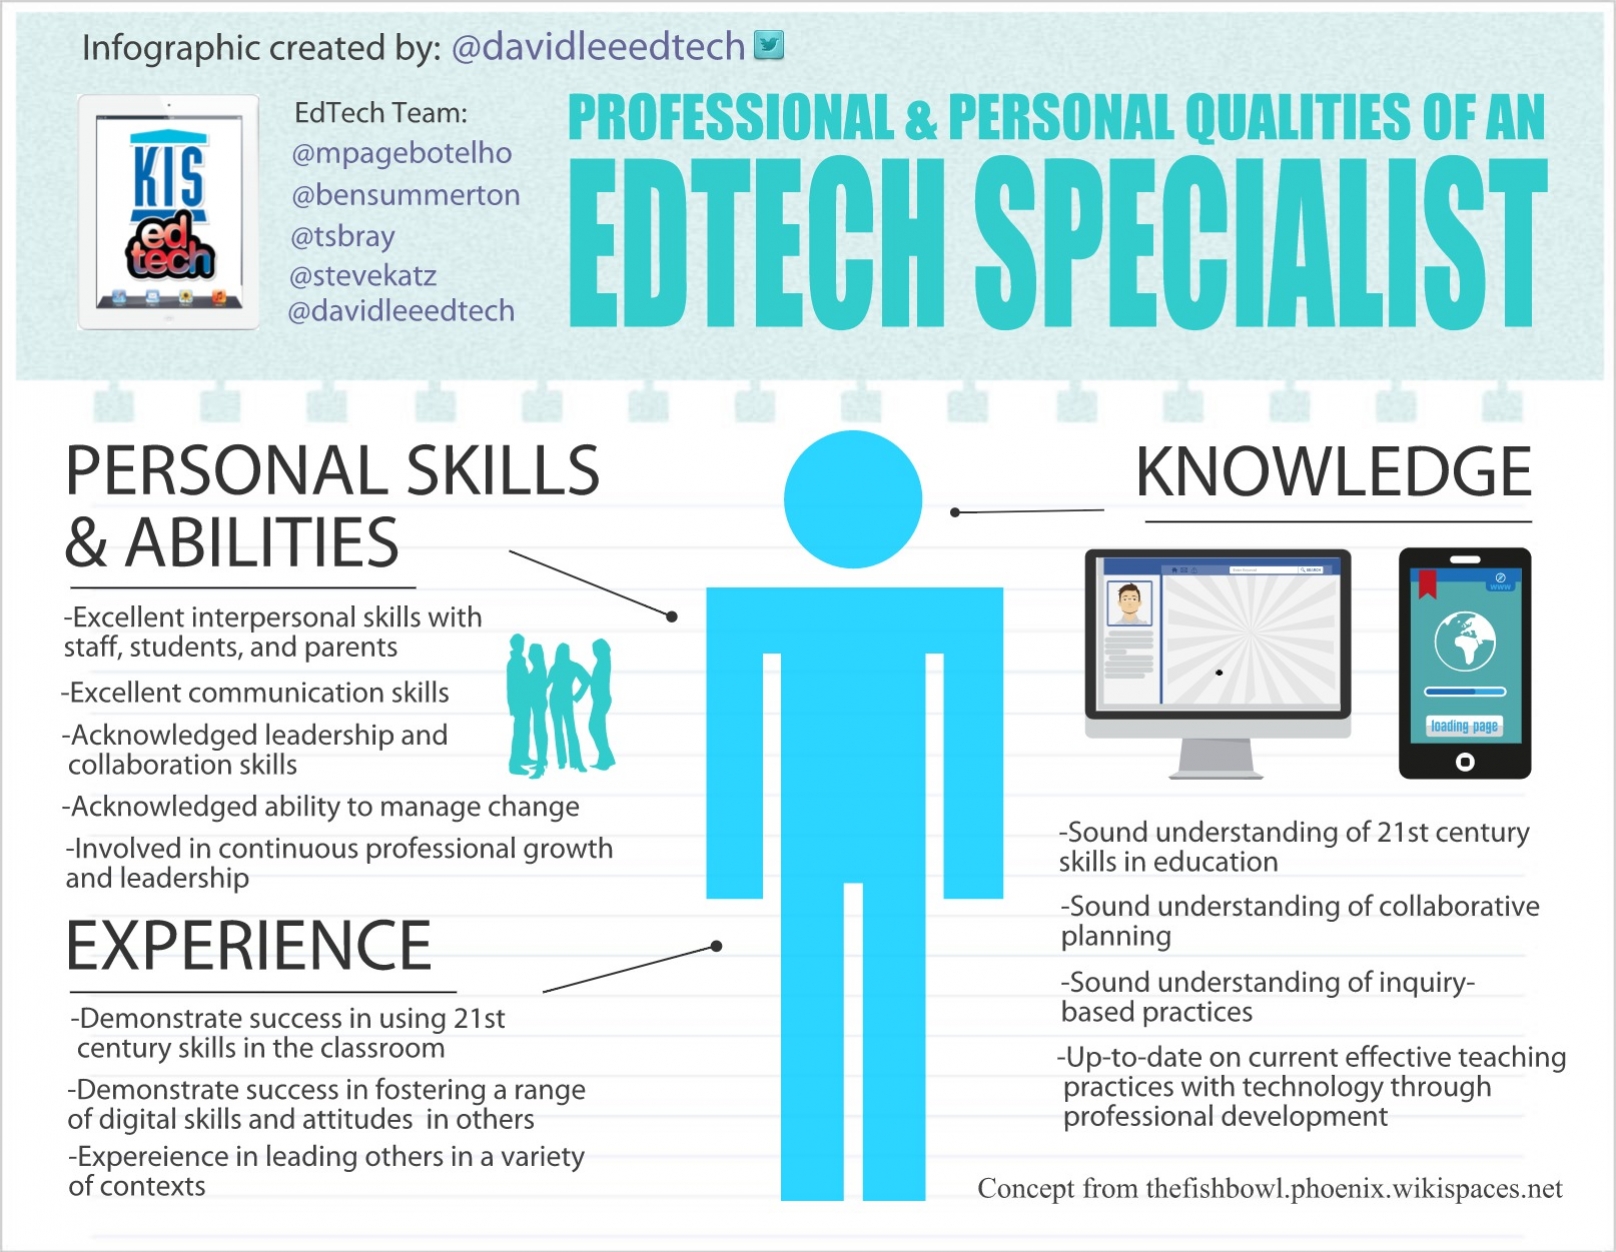 Skills qualities. Personal qualities and personal skills. Personal and professional skills. Professional qualities. Professional skills, personal qualities.